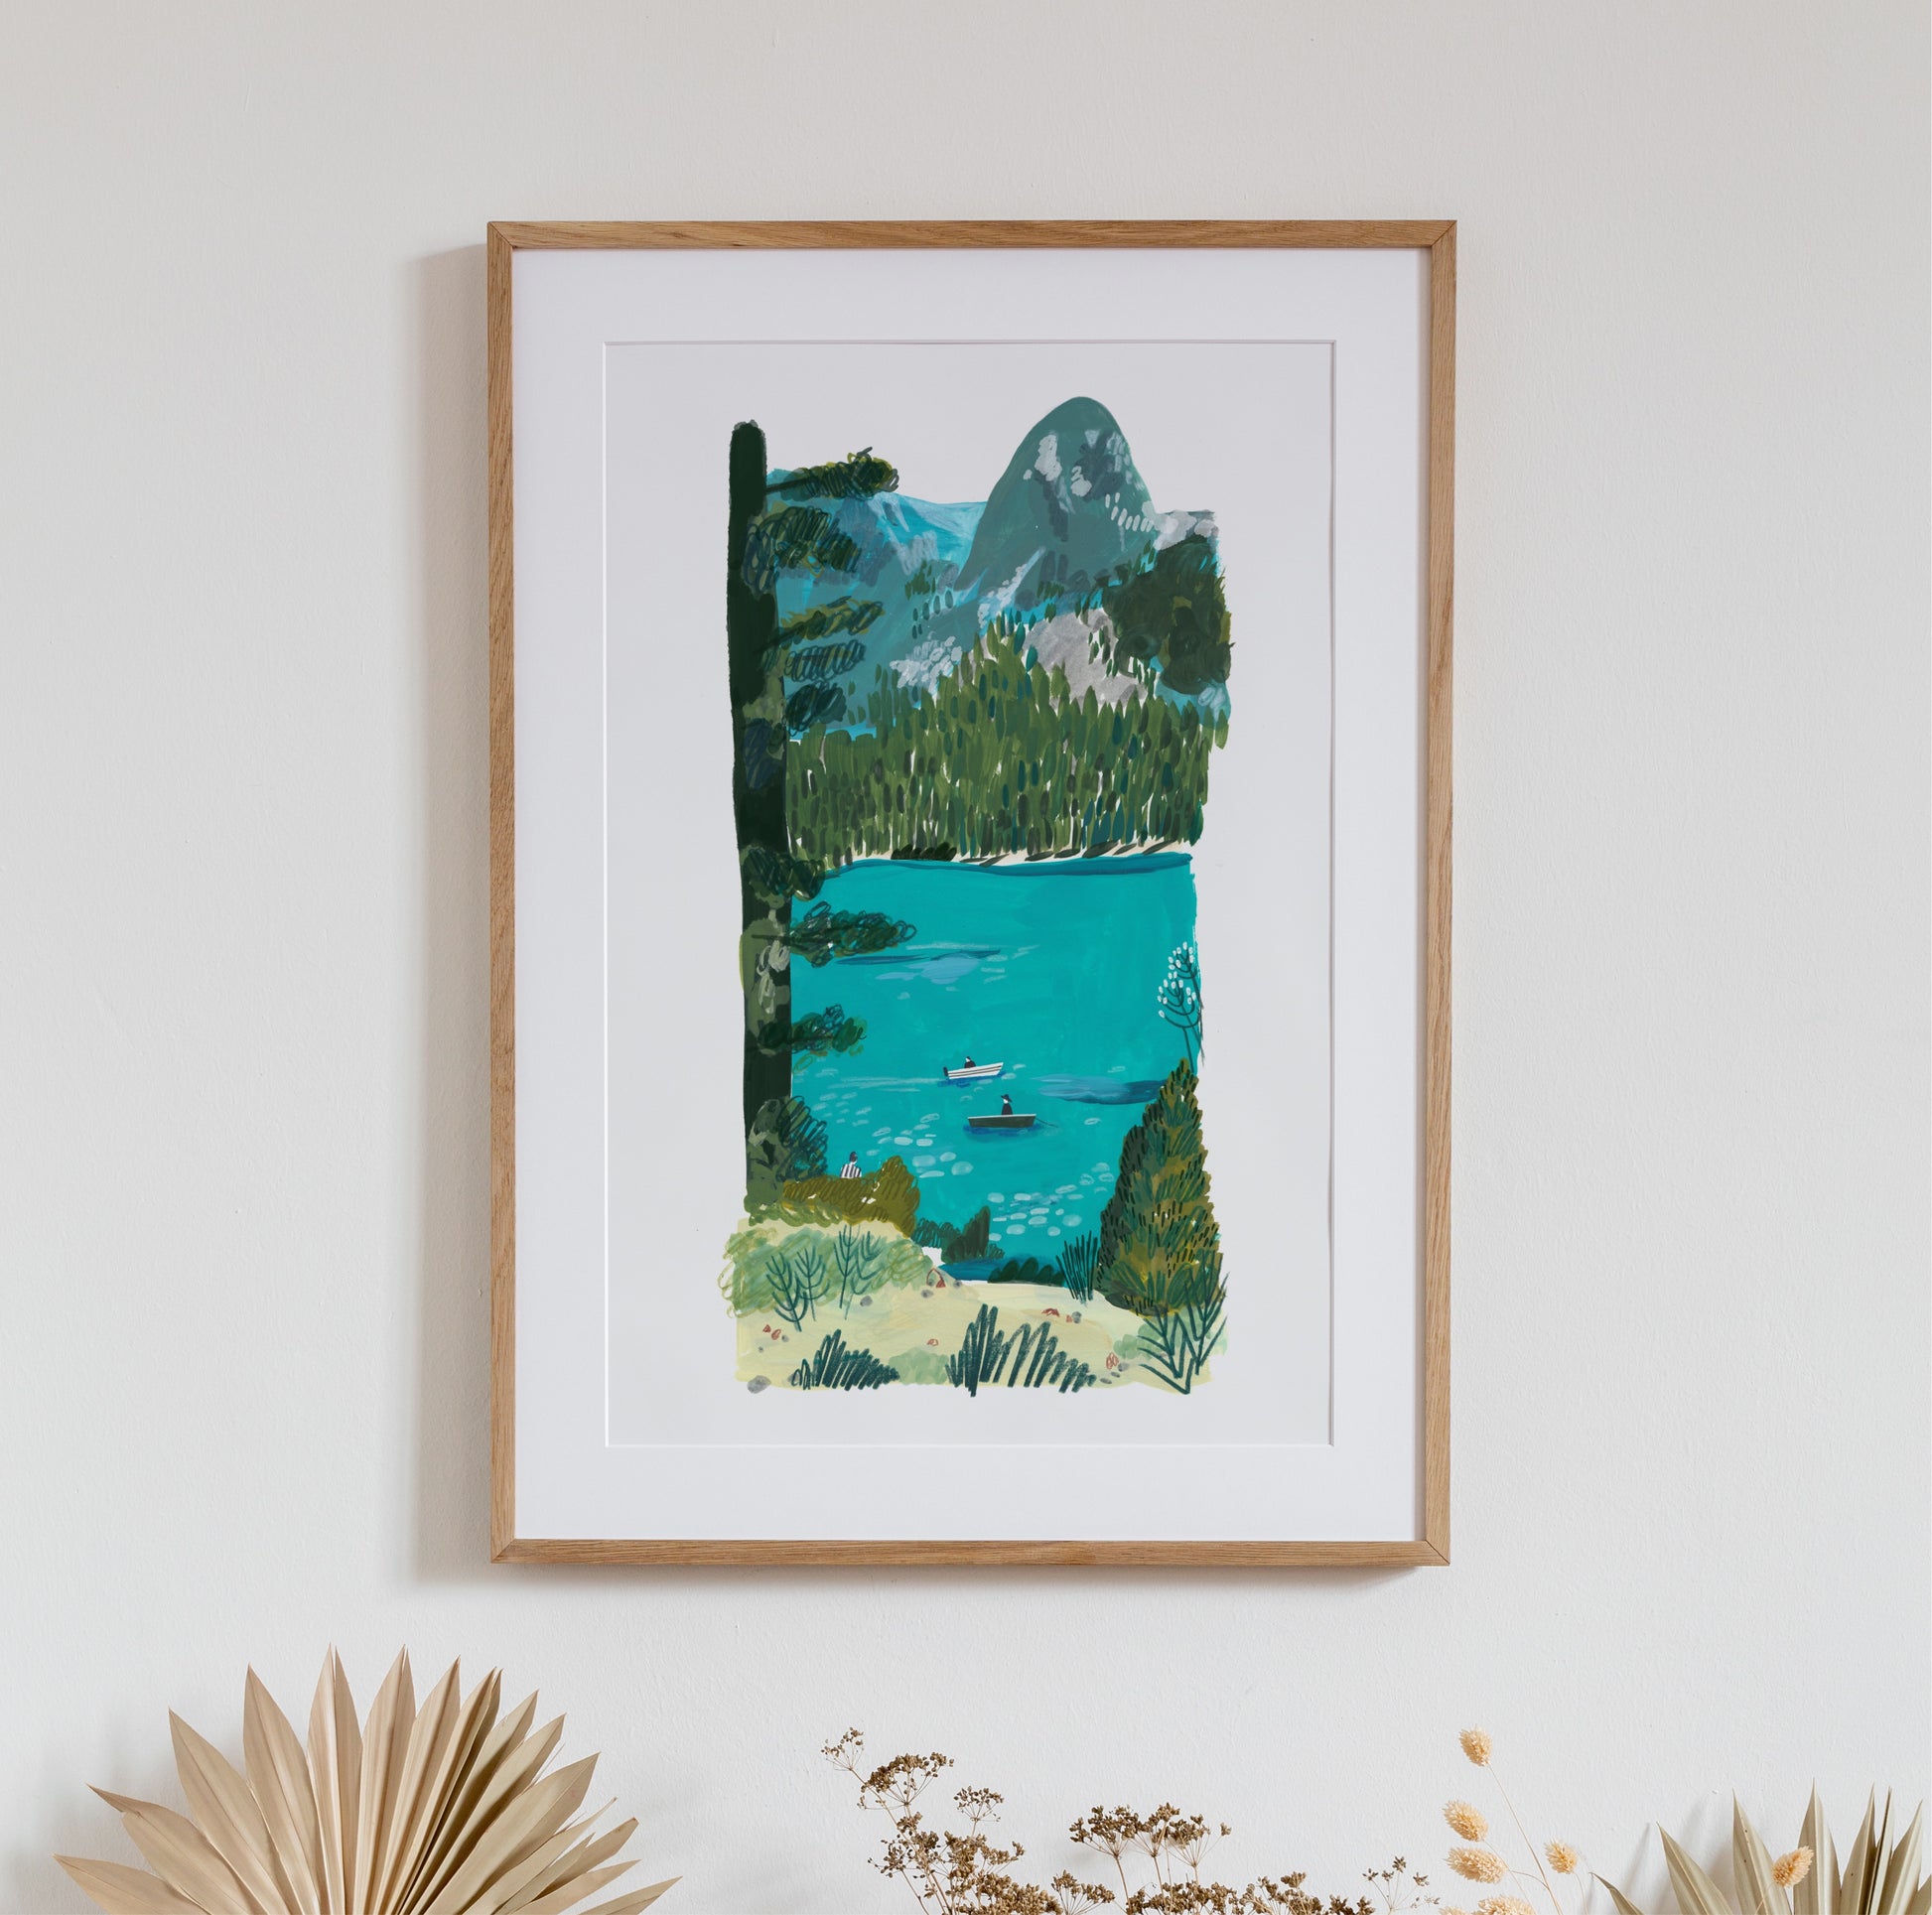 print of an original painting of lake Banff in Canada. large area of water with two small boars in it and trees and mountains in the backgraound. colours are teal, light yellow and green